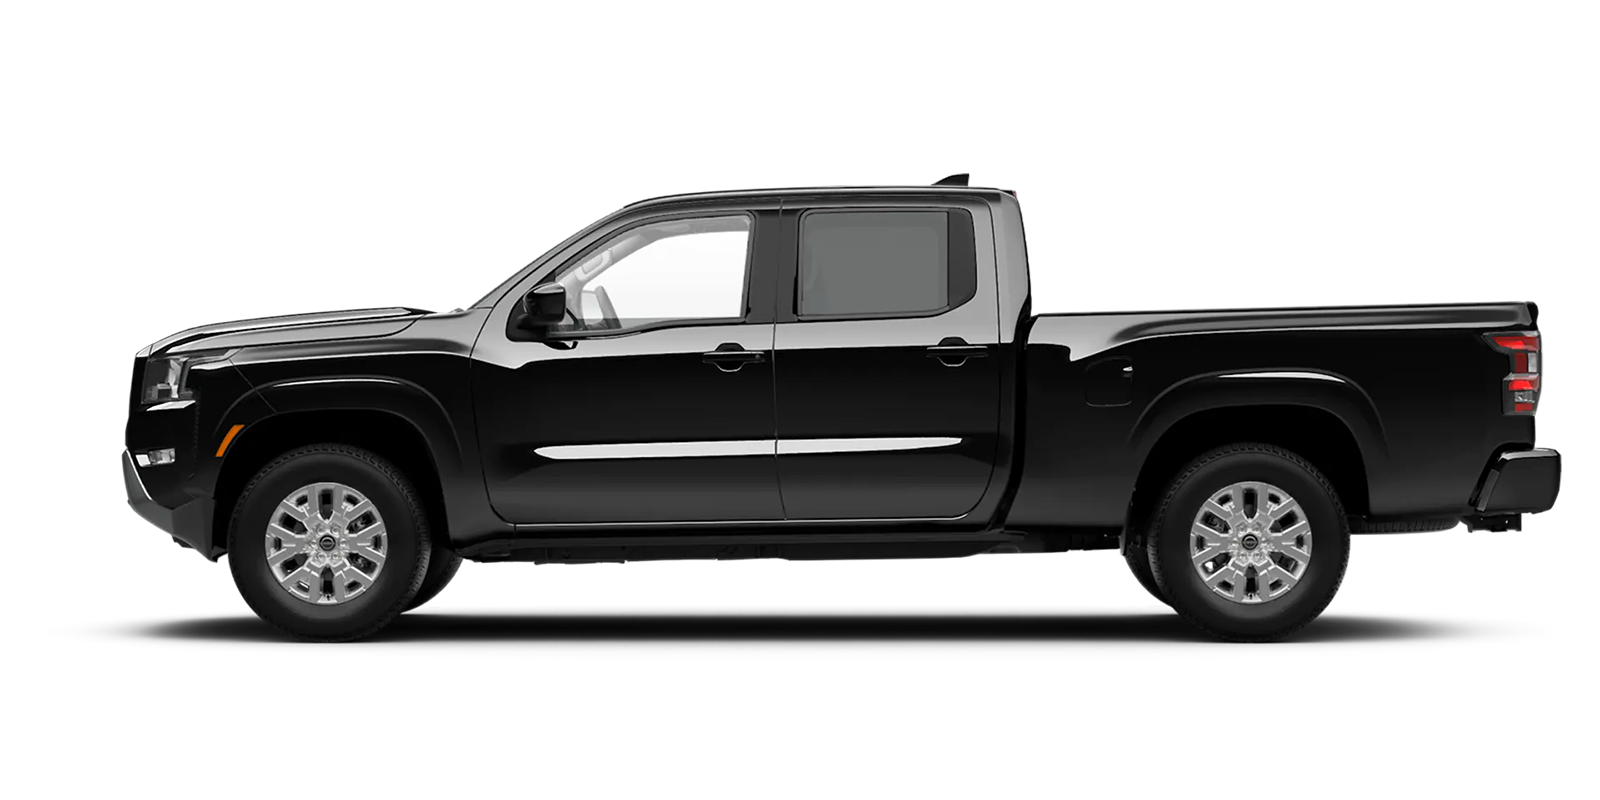 2022 Frontier Crew Cab Long Bed SV 4x2 in Super Black | Cole Nissan in Pocatello ID